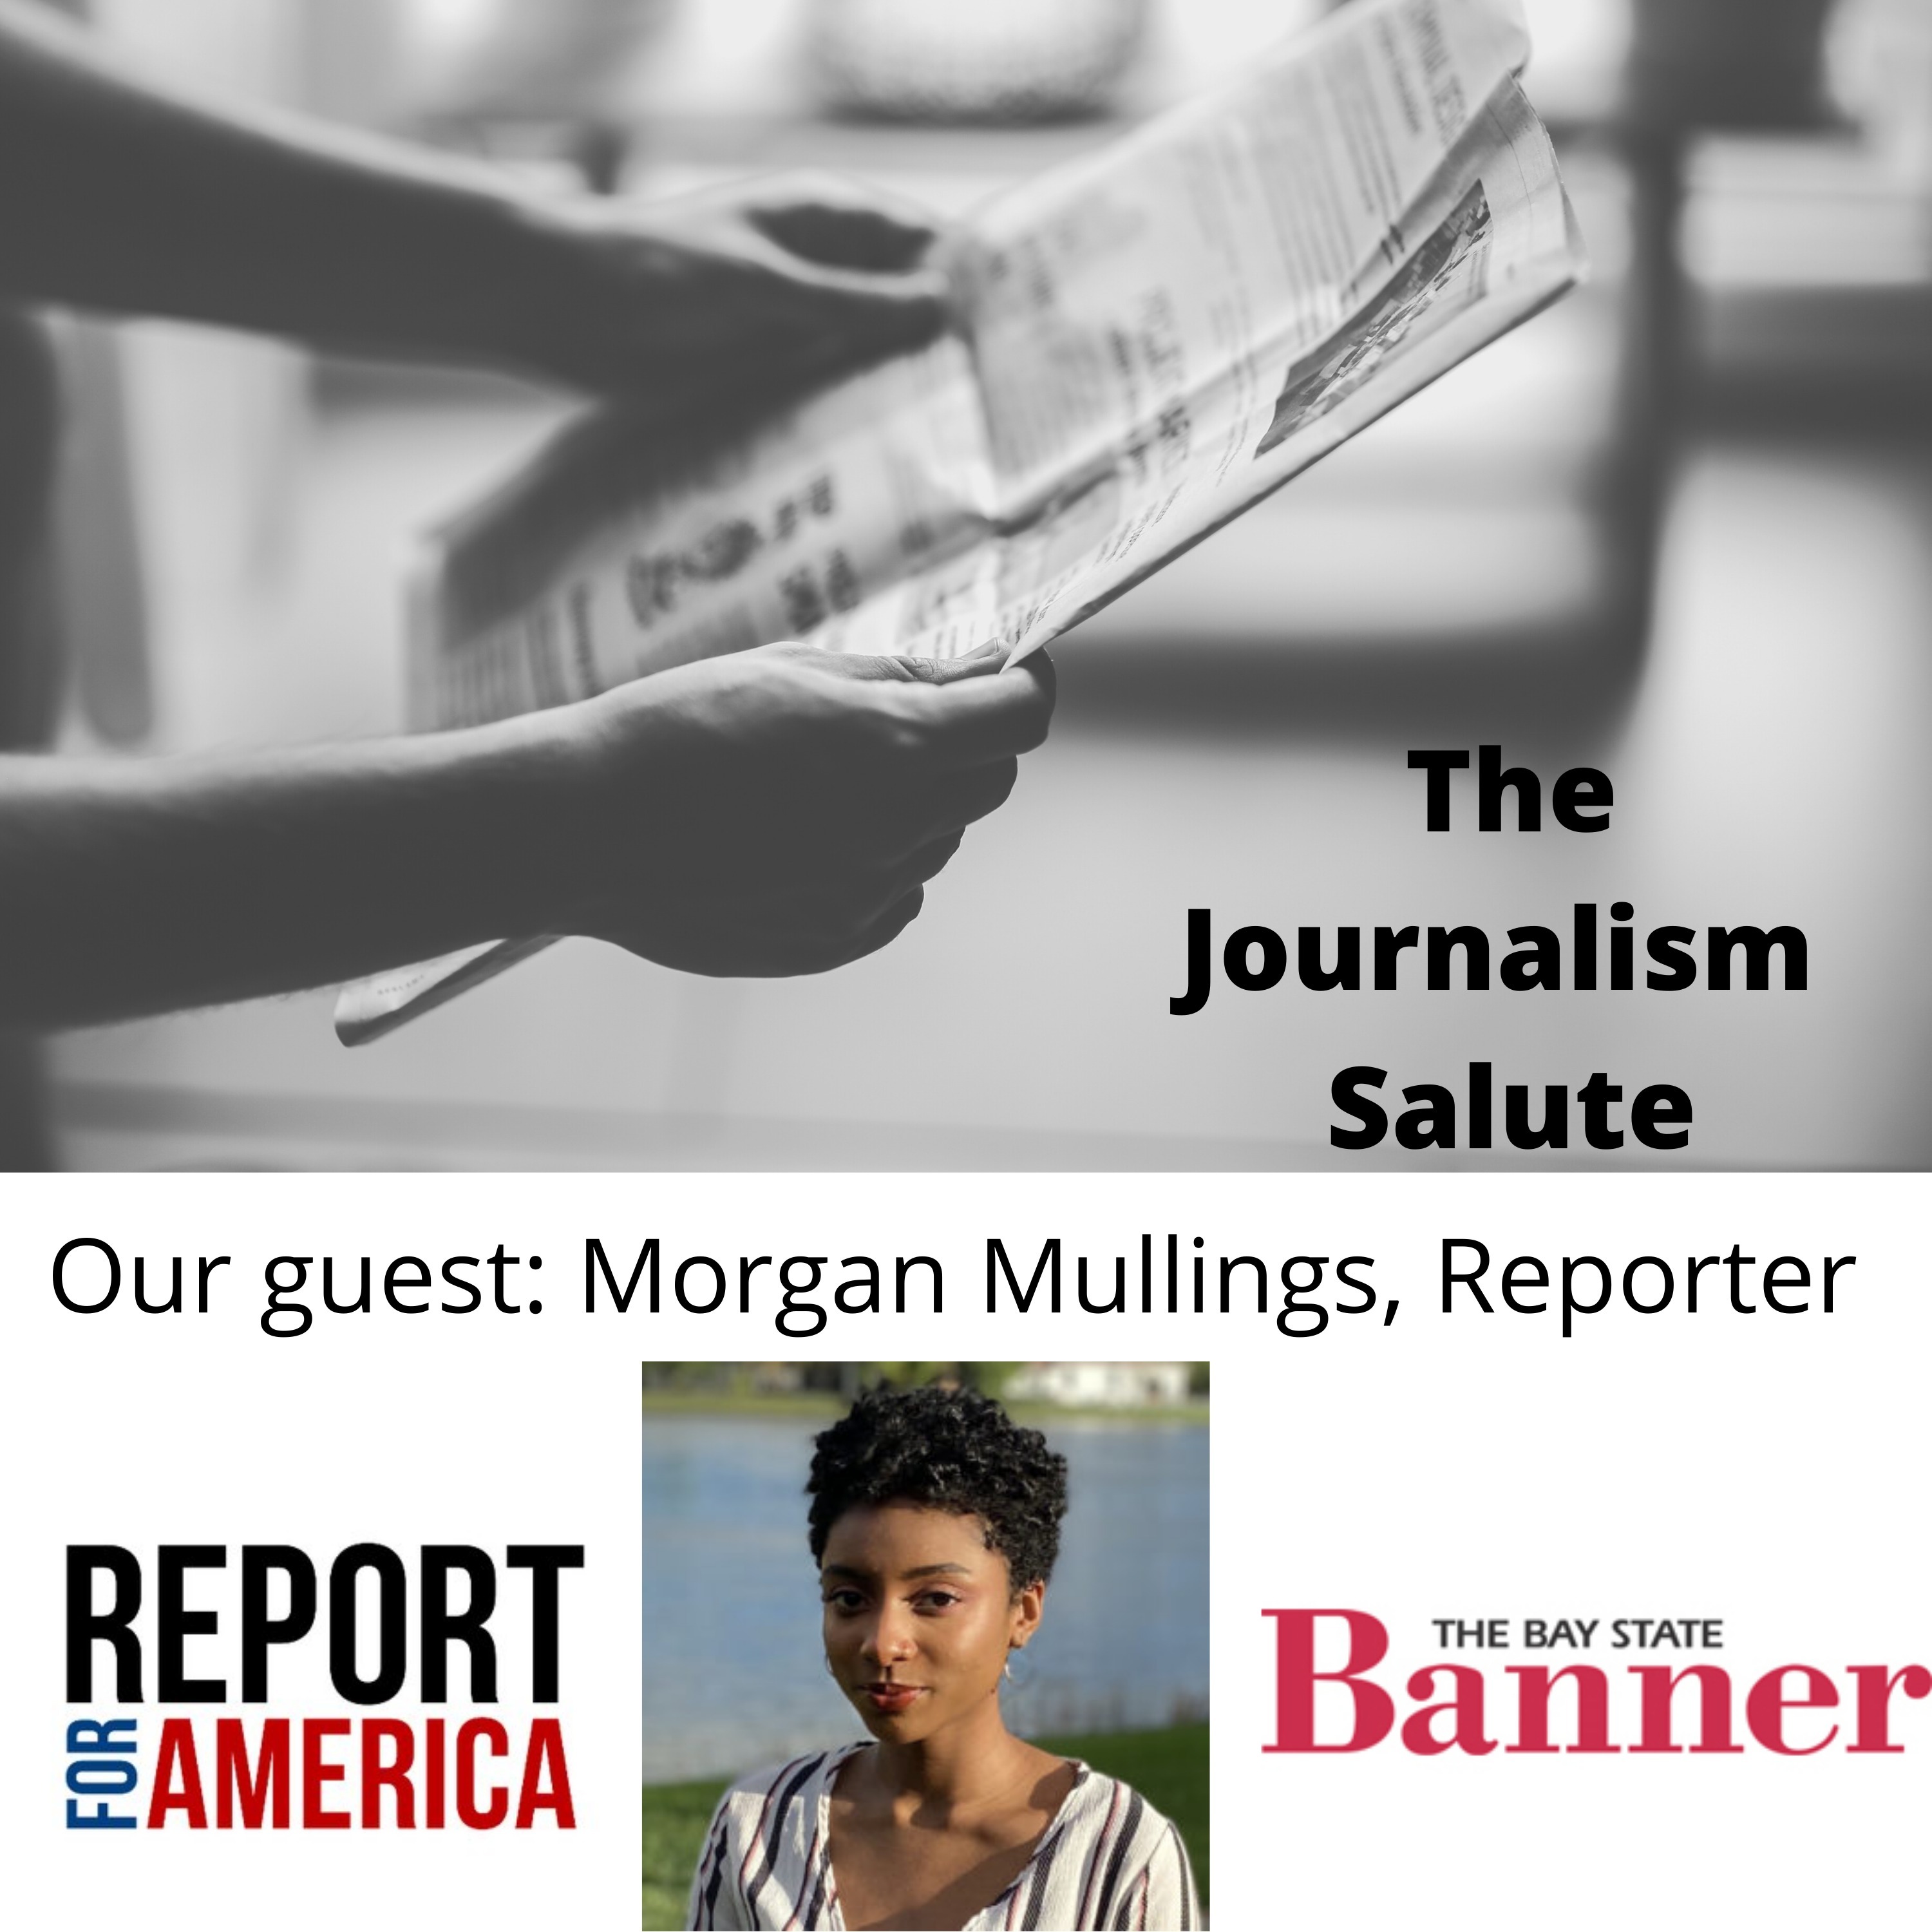 Morgan Mullings of the Bay State Banner & Report For America On The Beginning of a Journalism Career